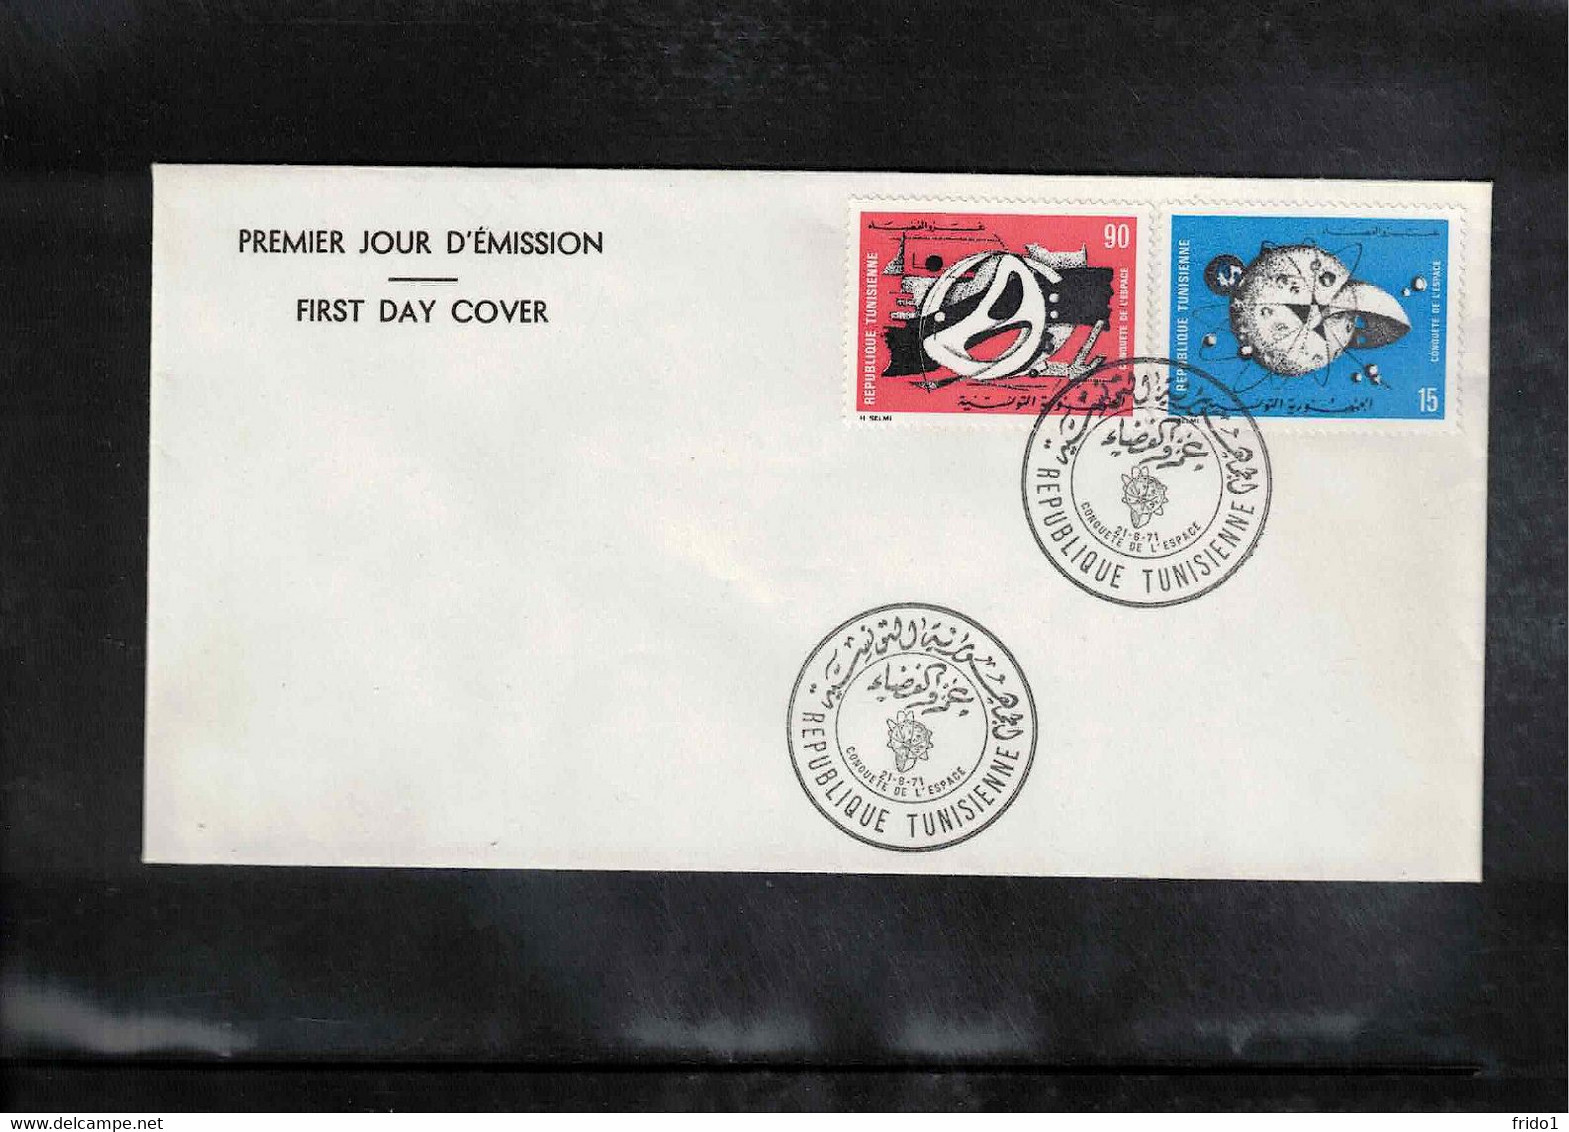 Tunisia / Tunisie 1971 Space / Raumfahrt Conquest Of Space FDC - Africa